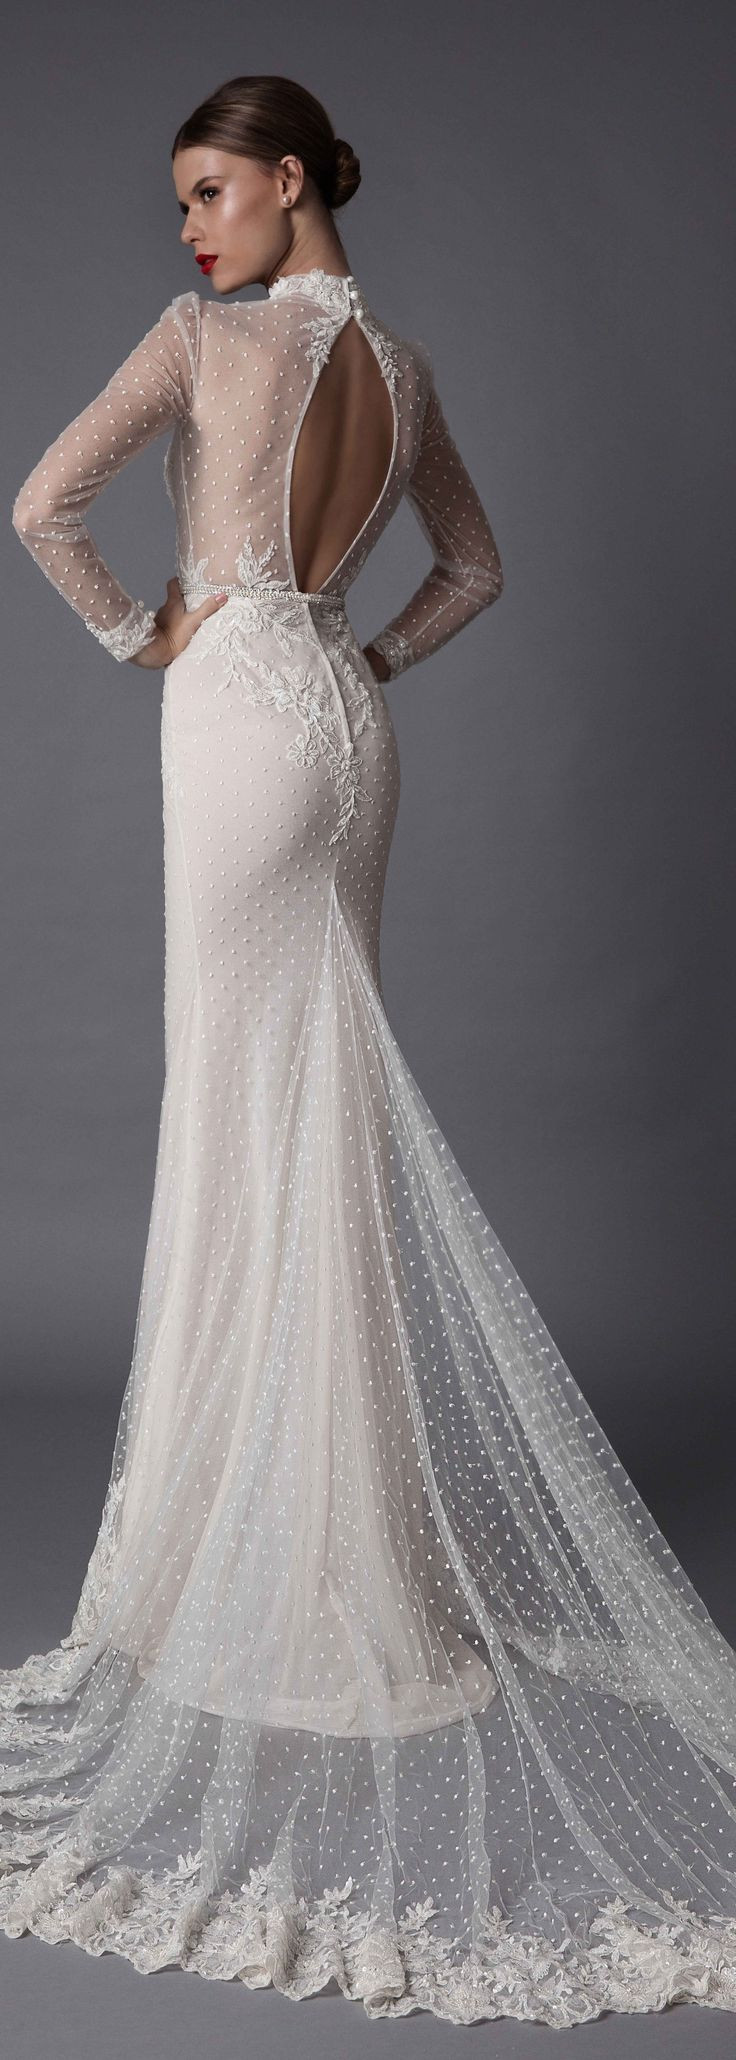 Berta Wedding Dresses Prices
 Musebyberta style AMADEA now available at our BERTA NYC